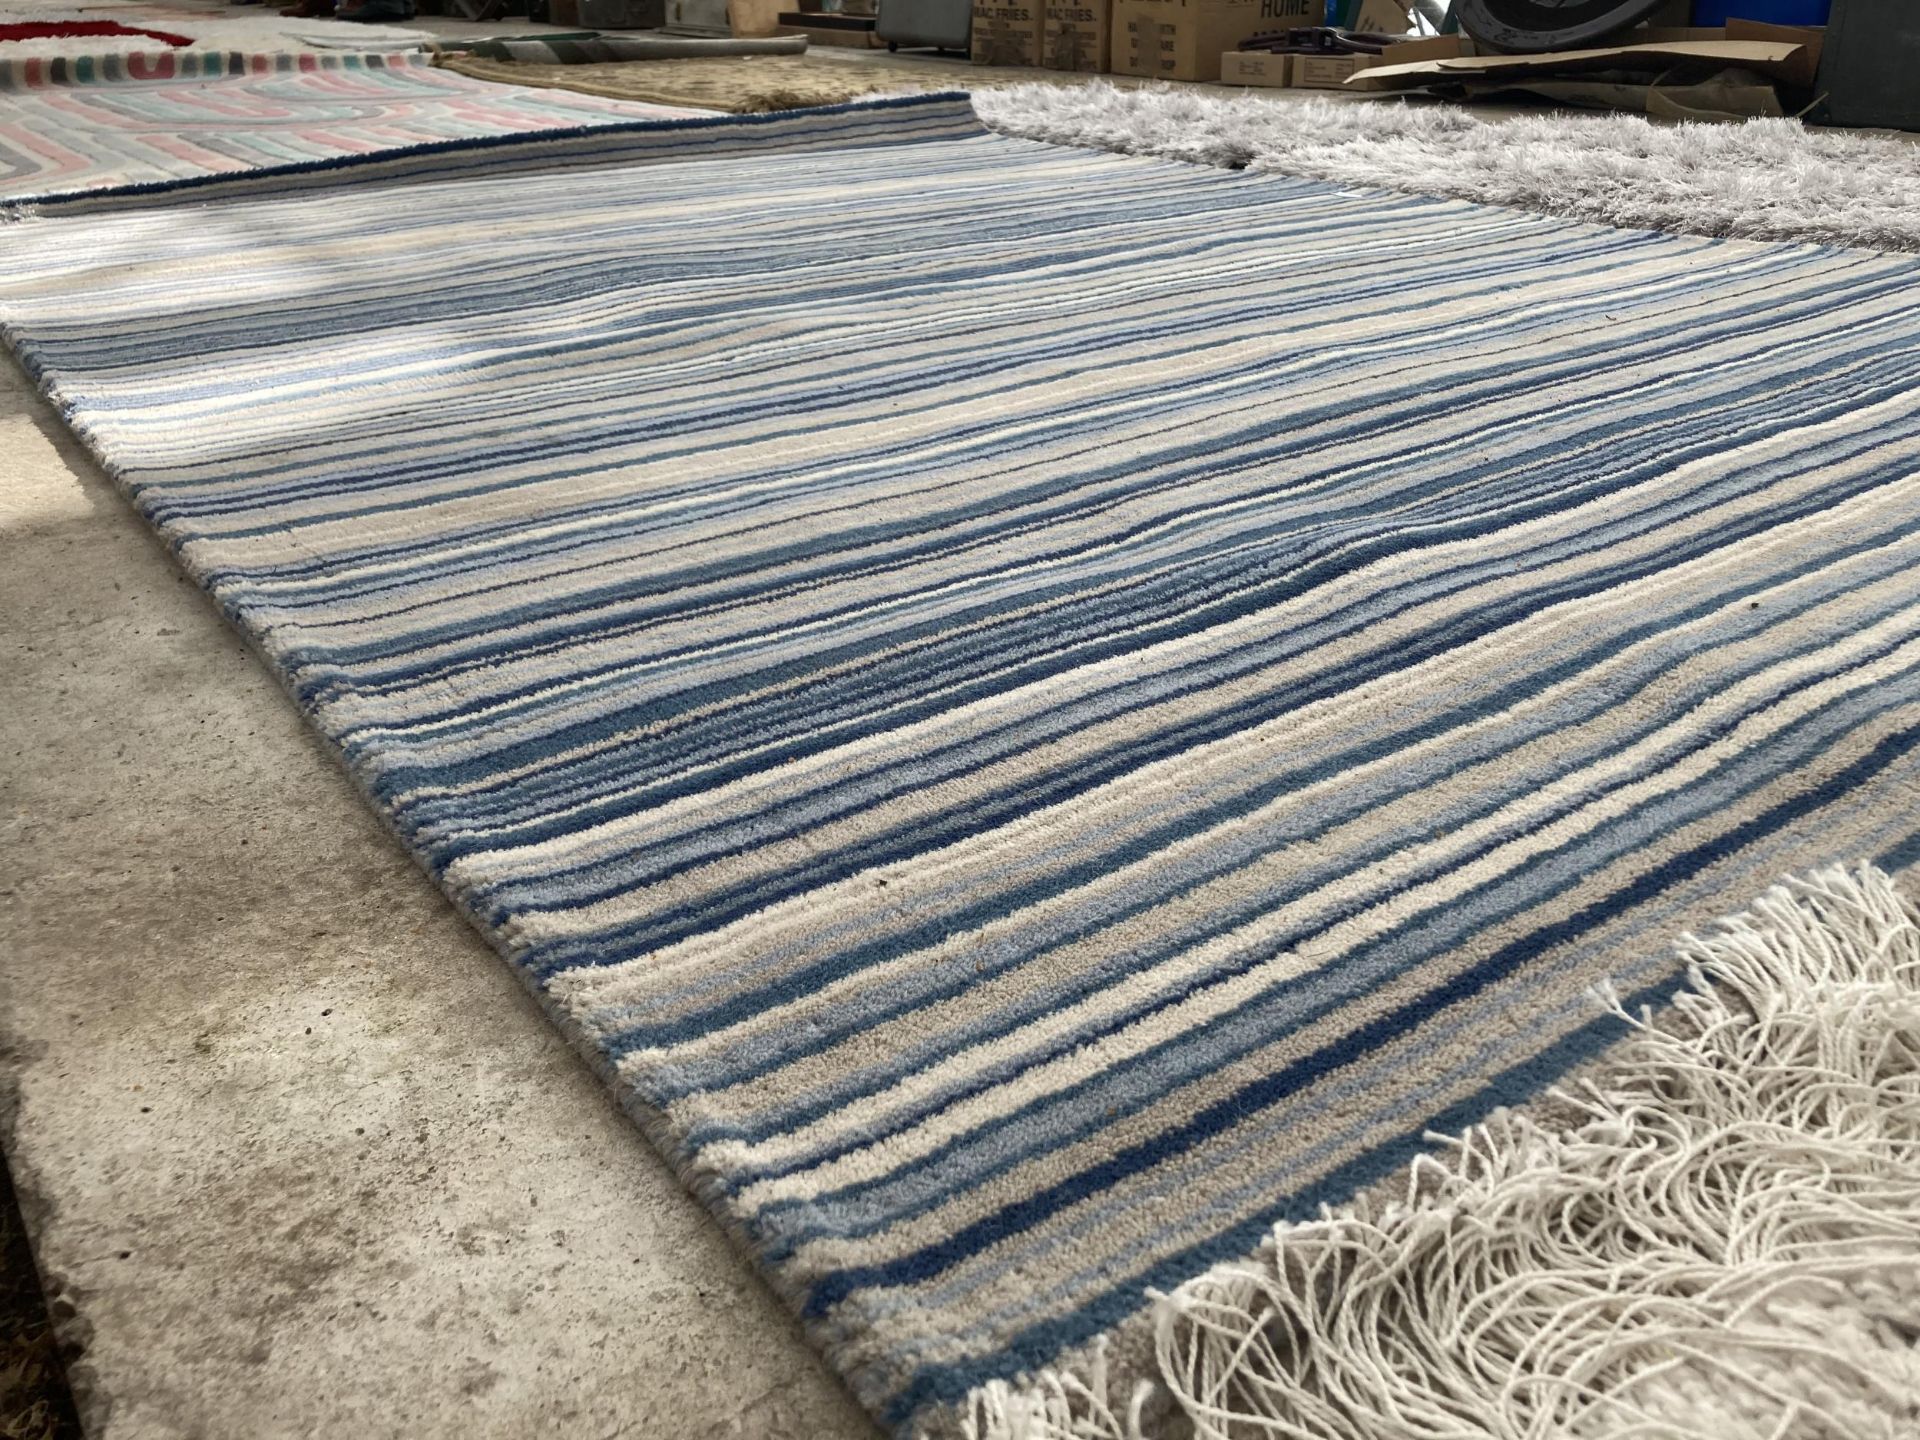 A LARGE BLUE STRIPPED RUG - Image 2 of 2